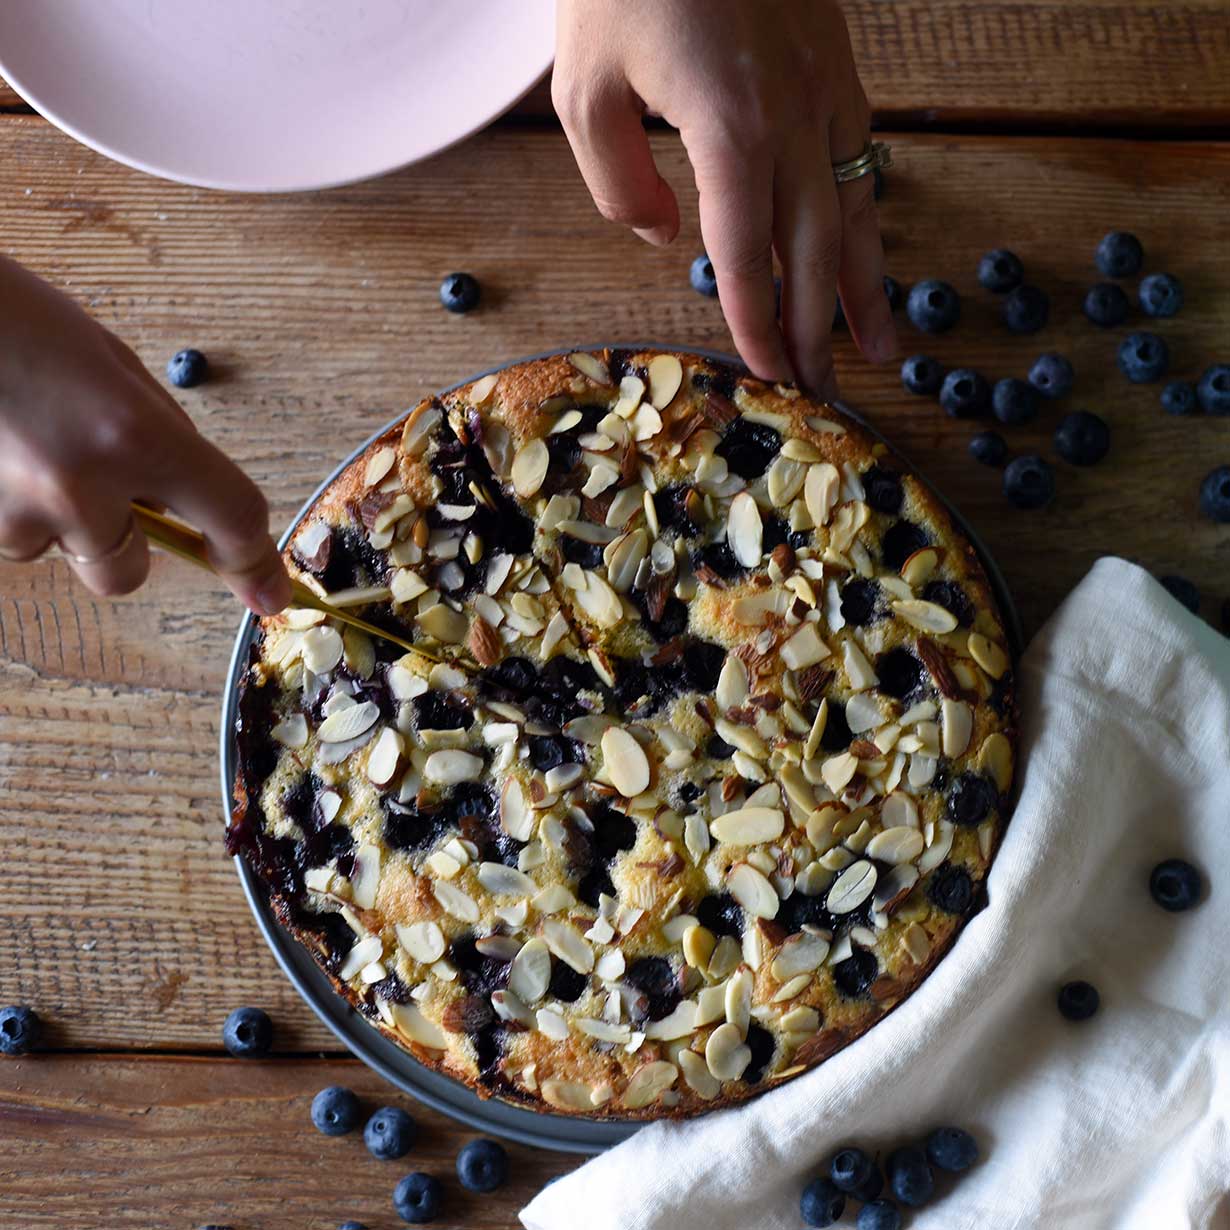 Coconut, Almond, and Blueberry Cake